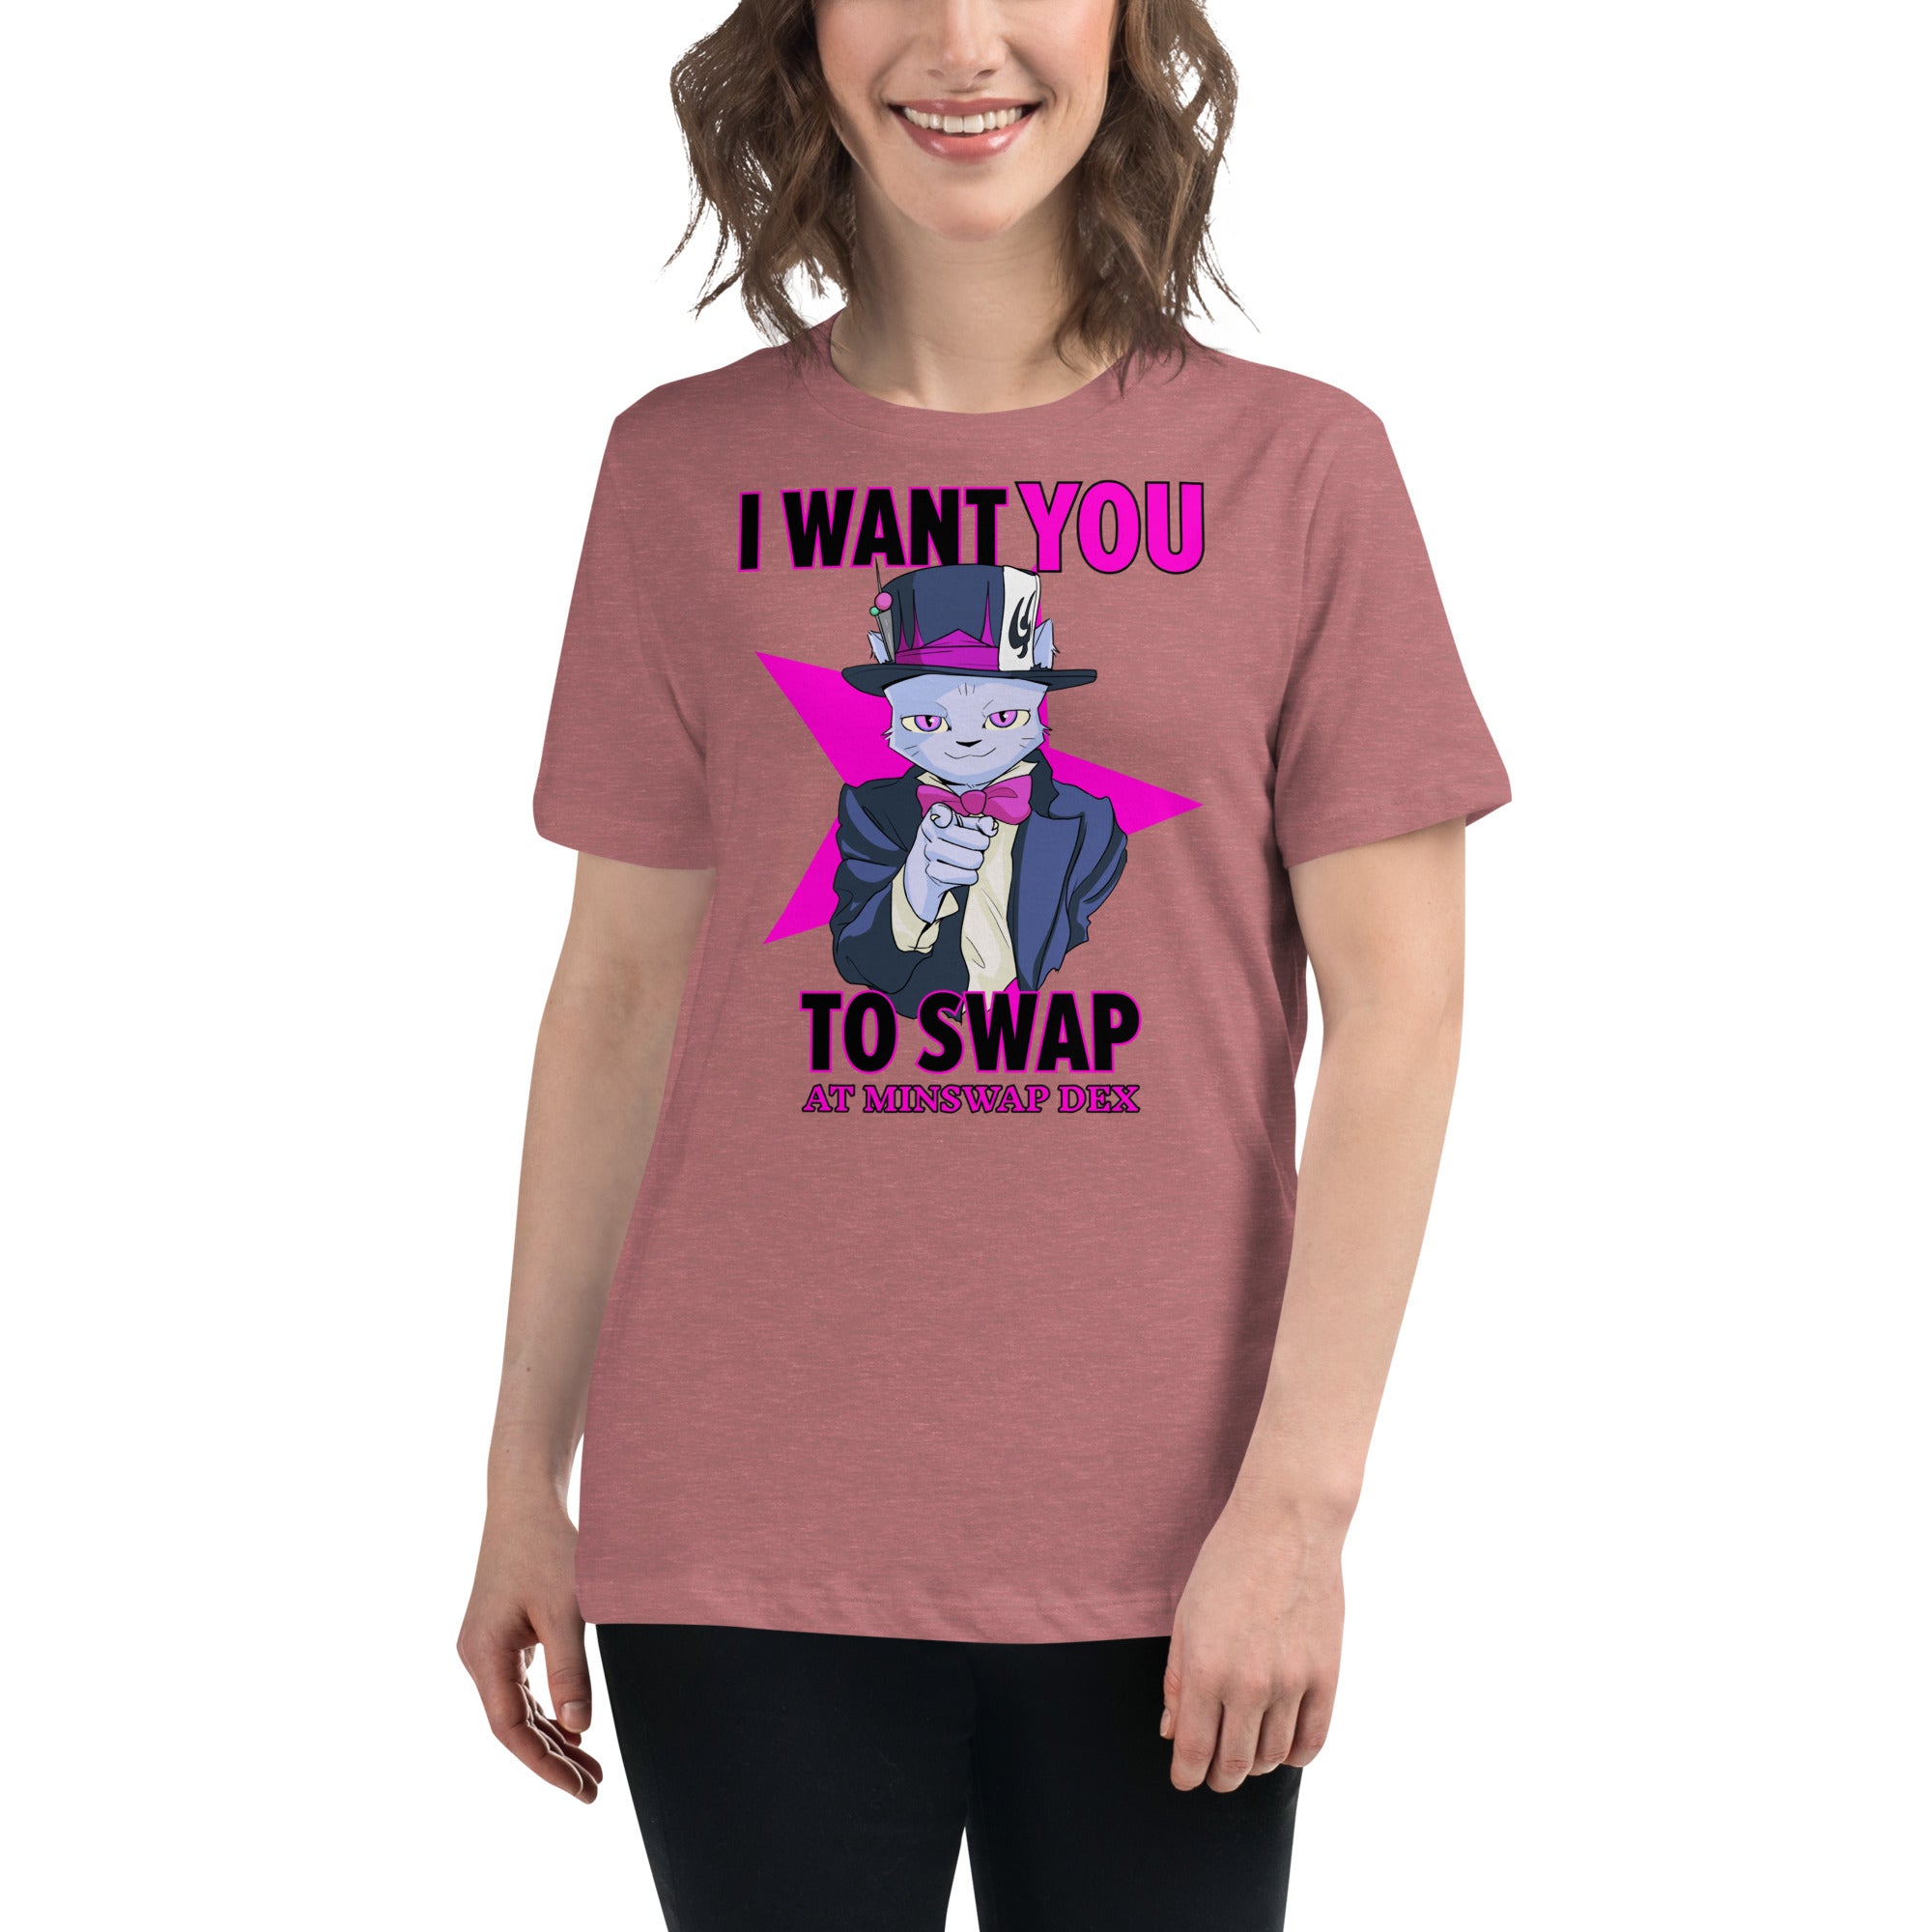 I Want You Women's Relaxed T-Shirt